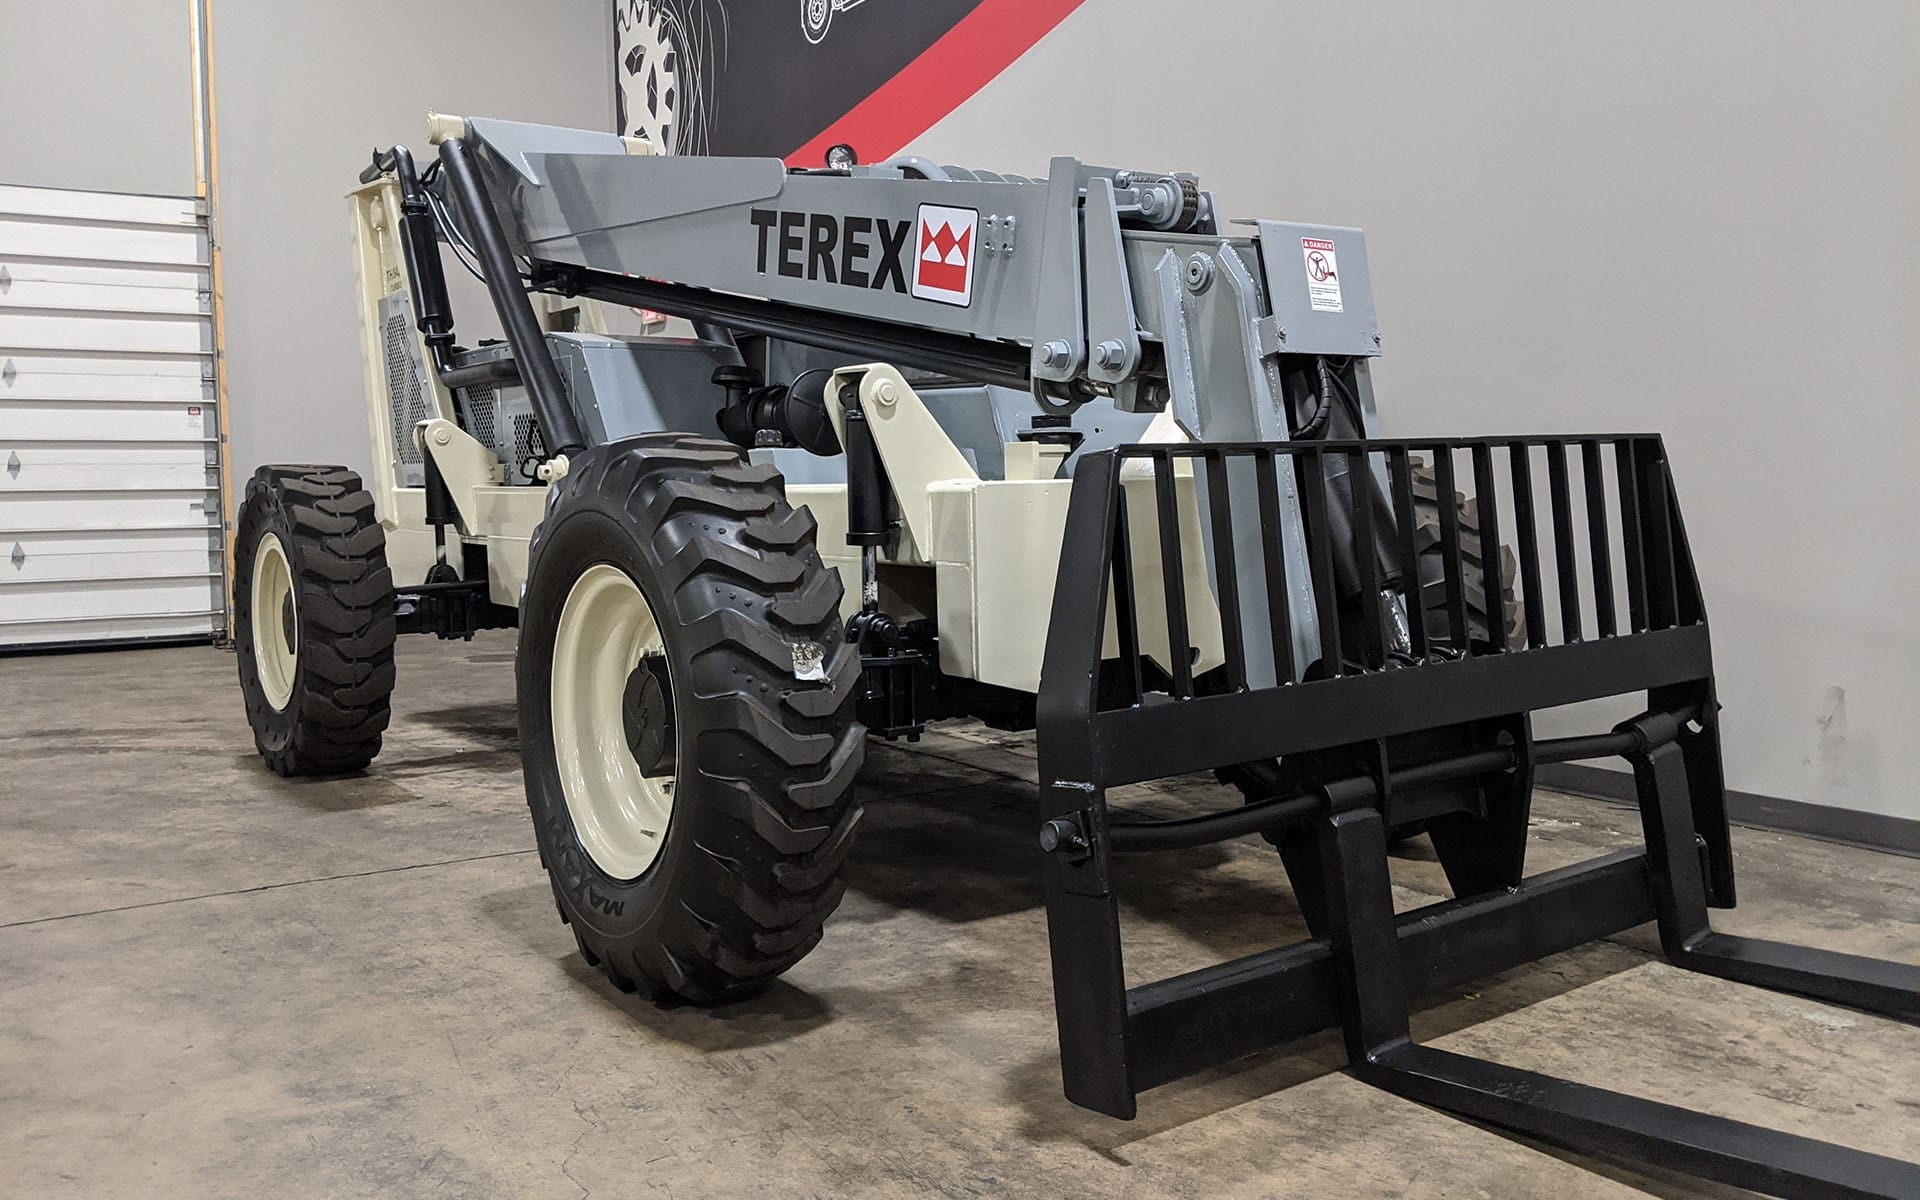 Used 2003 TEREX TH842C  | Cary, IL